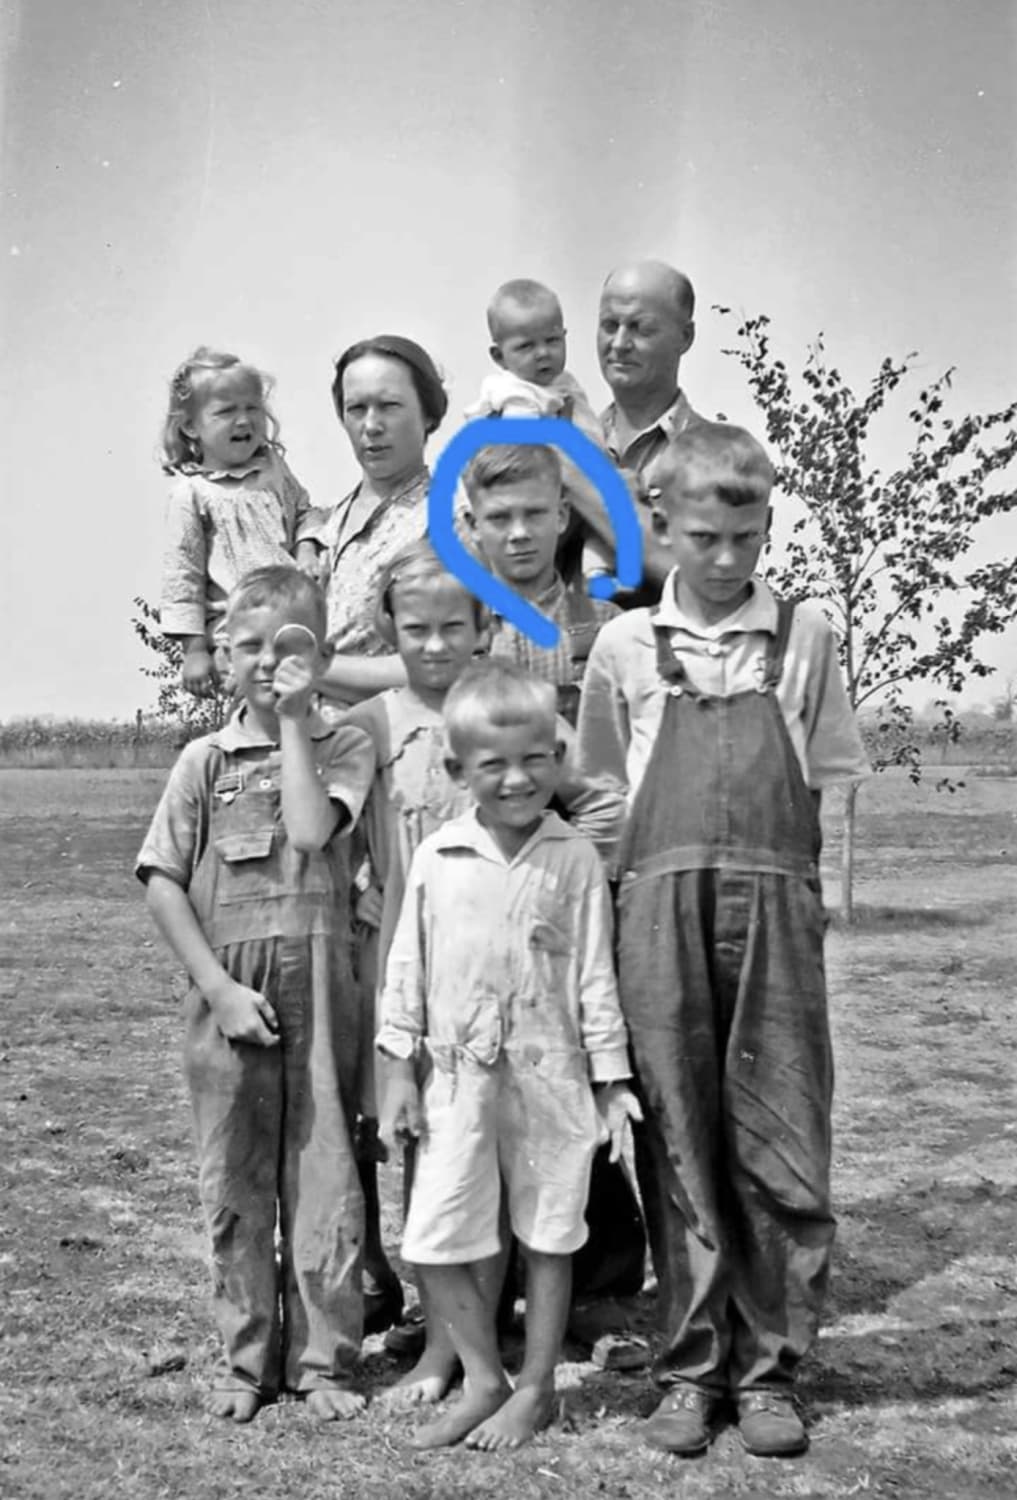 A Swedish immigrant family in Minnesota in the early 1930s. Circled is my grandpa.